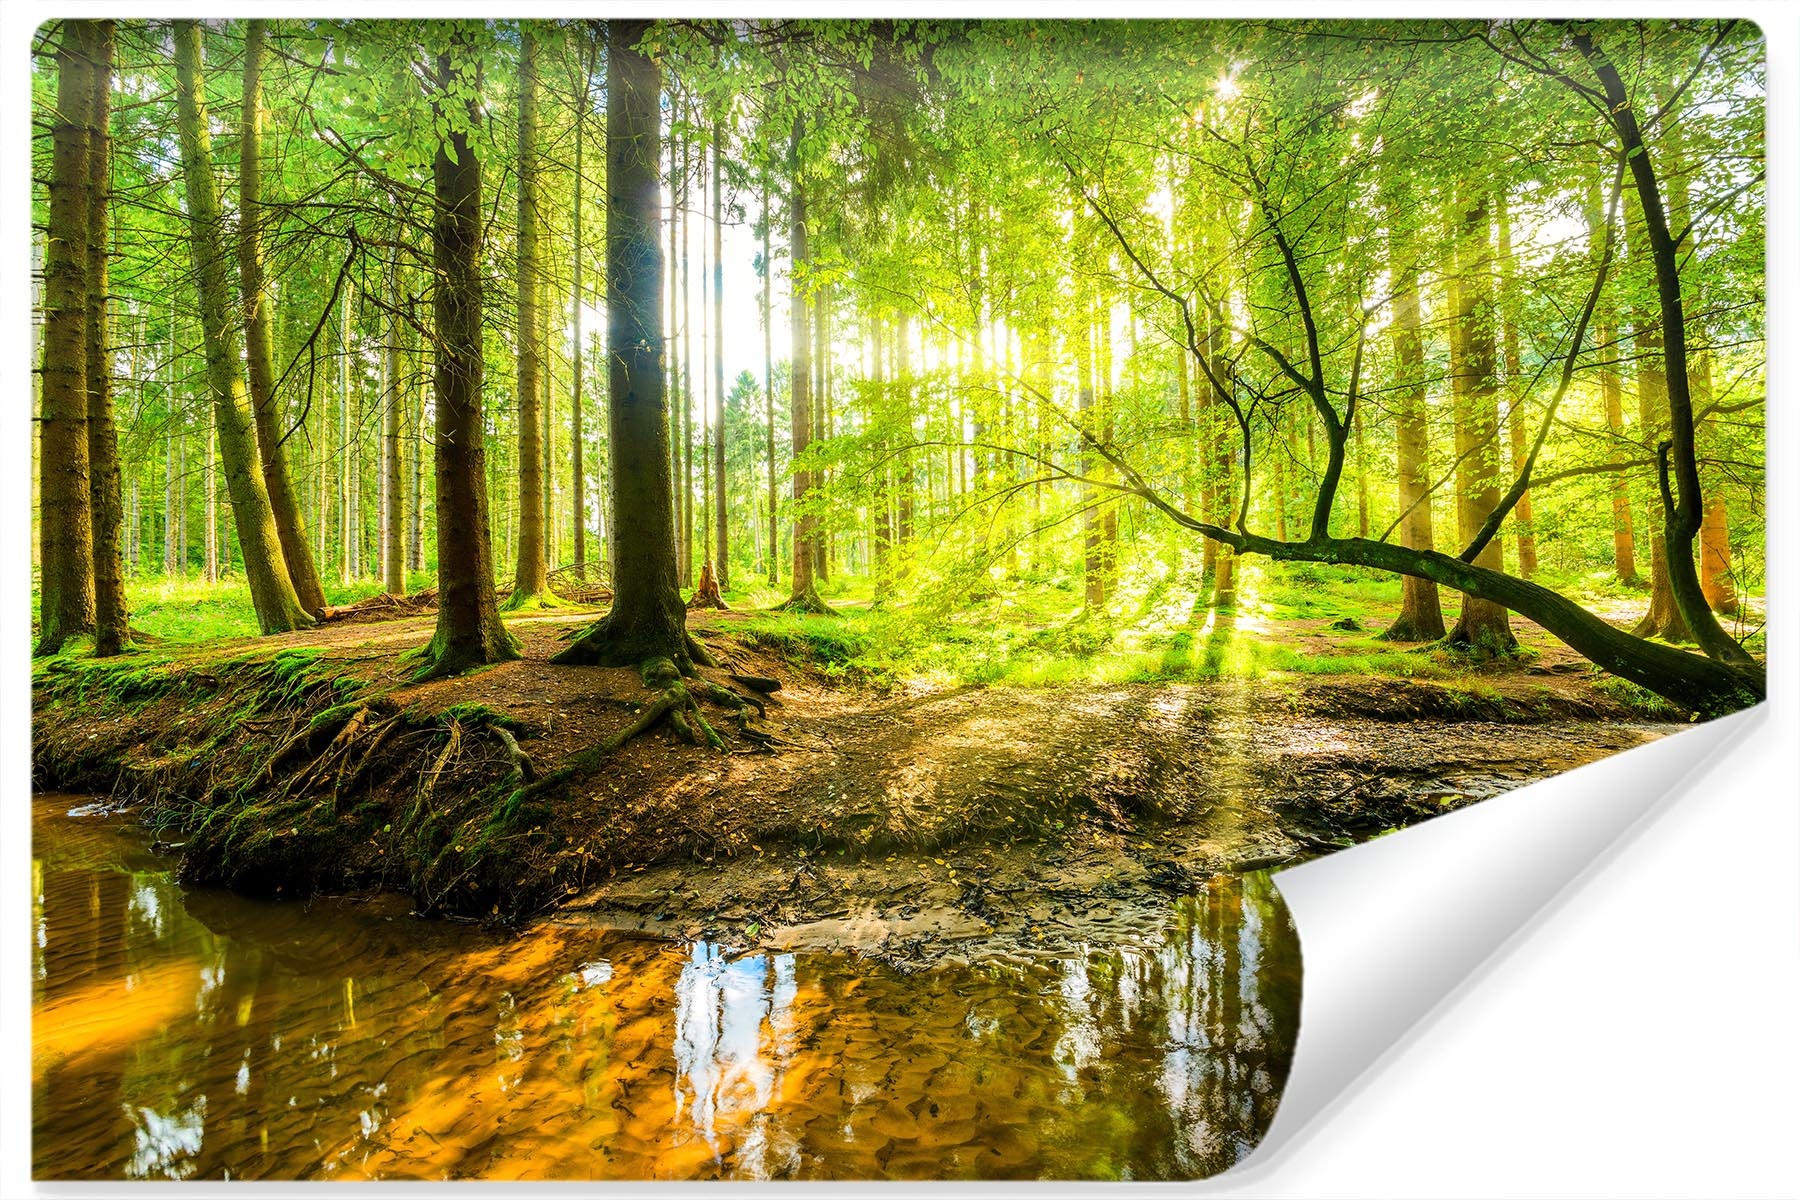 Photo wallpaper Beautiful forest landscape in spring in 3d effect Non-woven 104 x 70.5 cm FT-3814-VEM